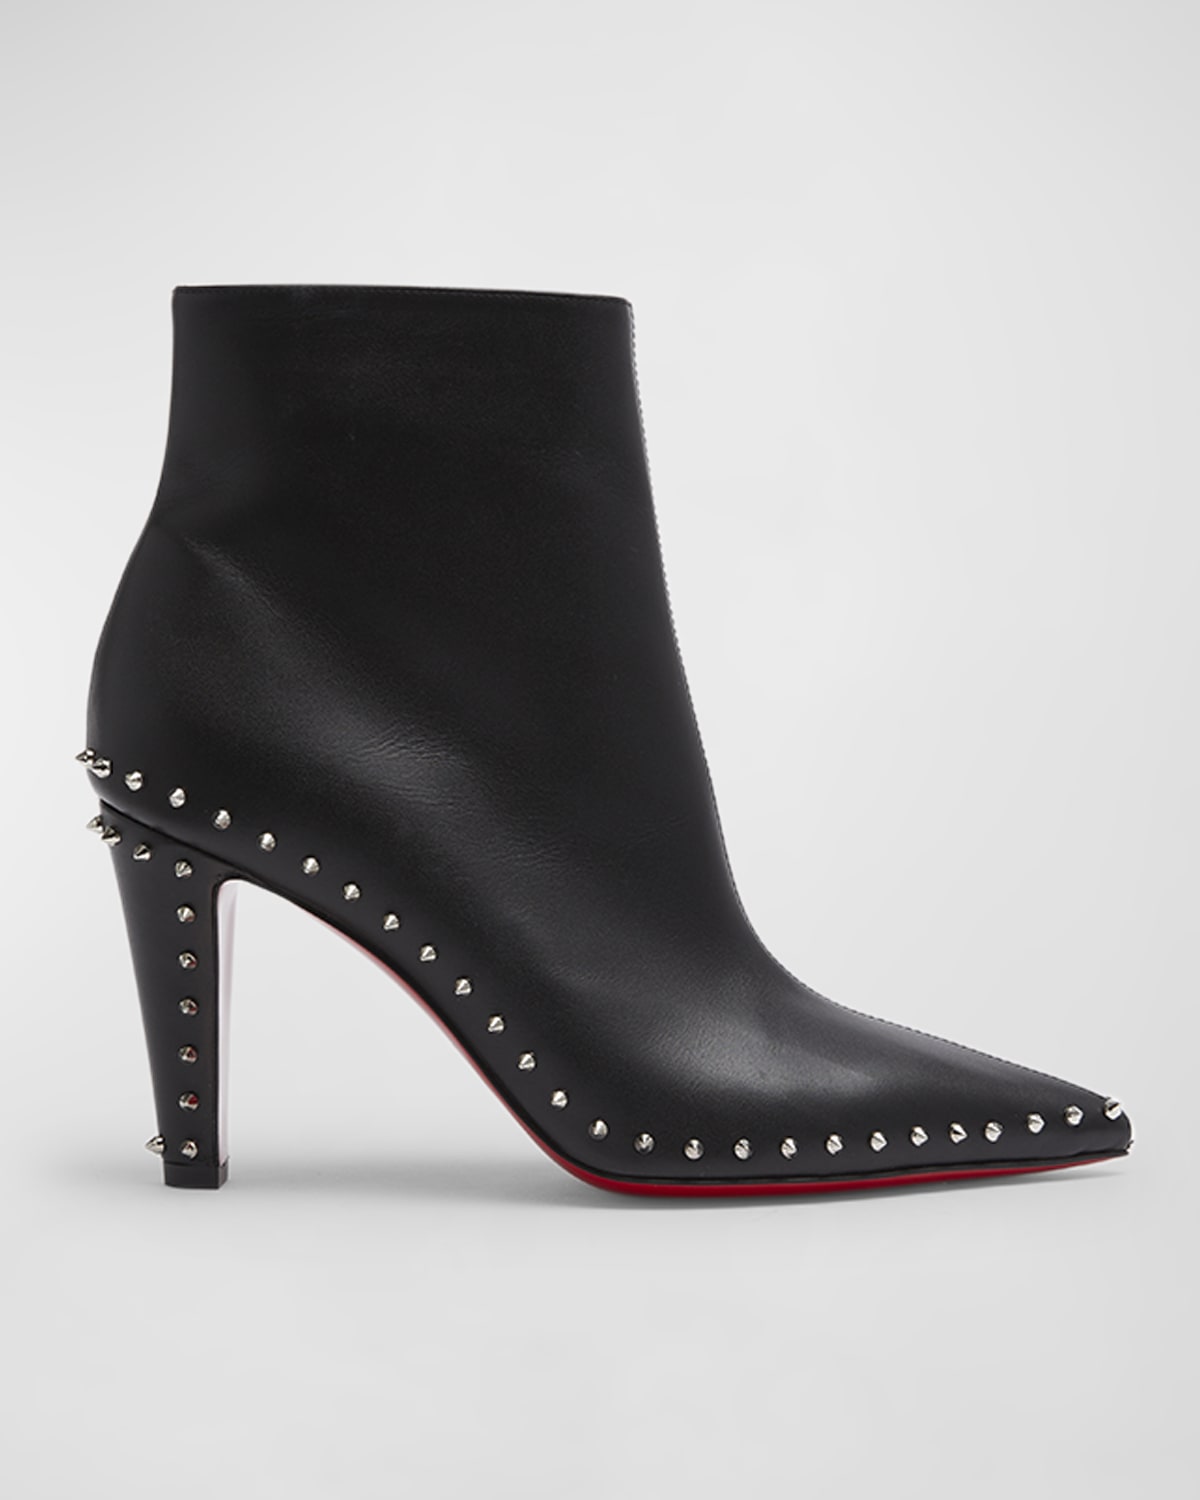 Christian Louboutin Suprabooty Red Sole Suede Ankle Booties | Neiman Marcus